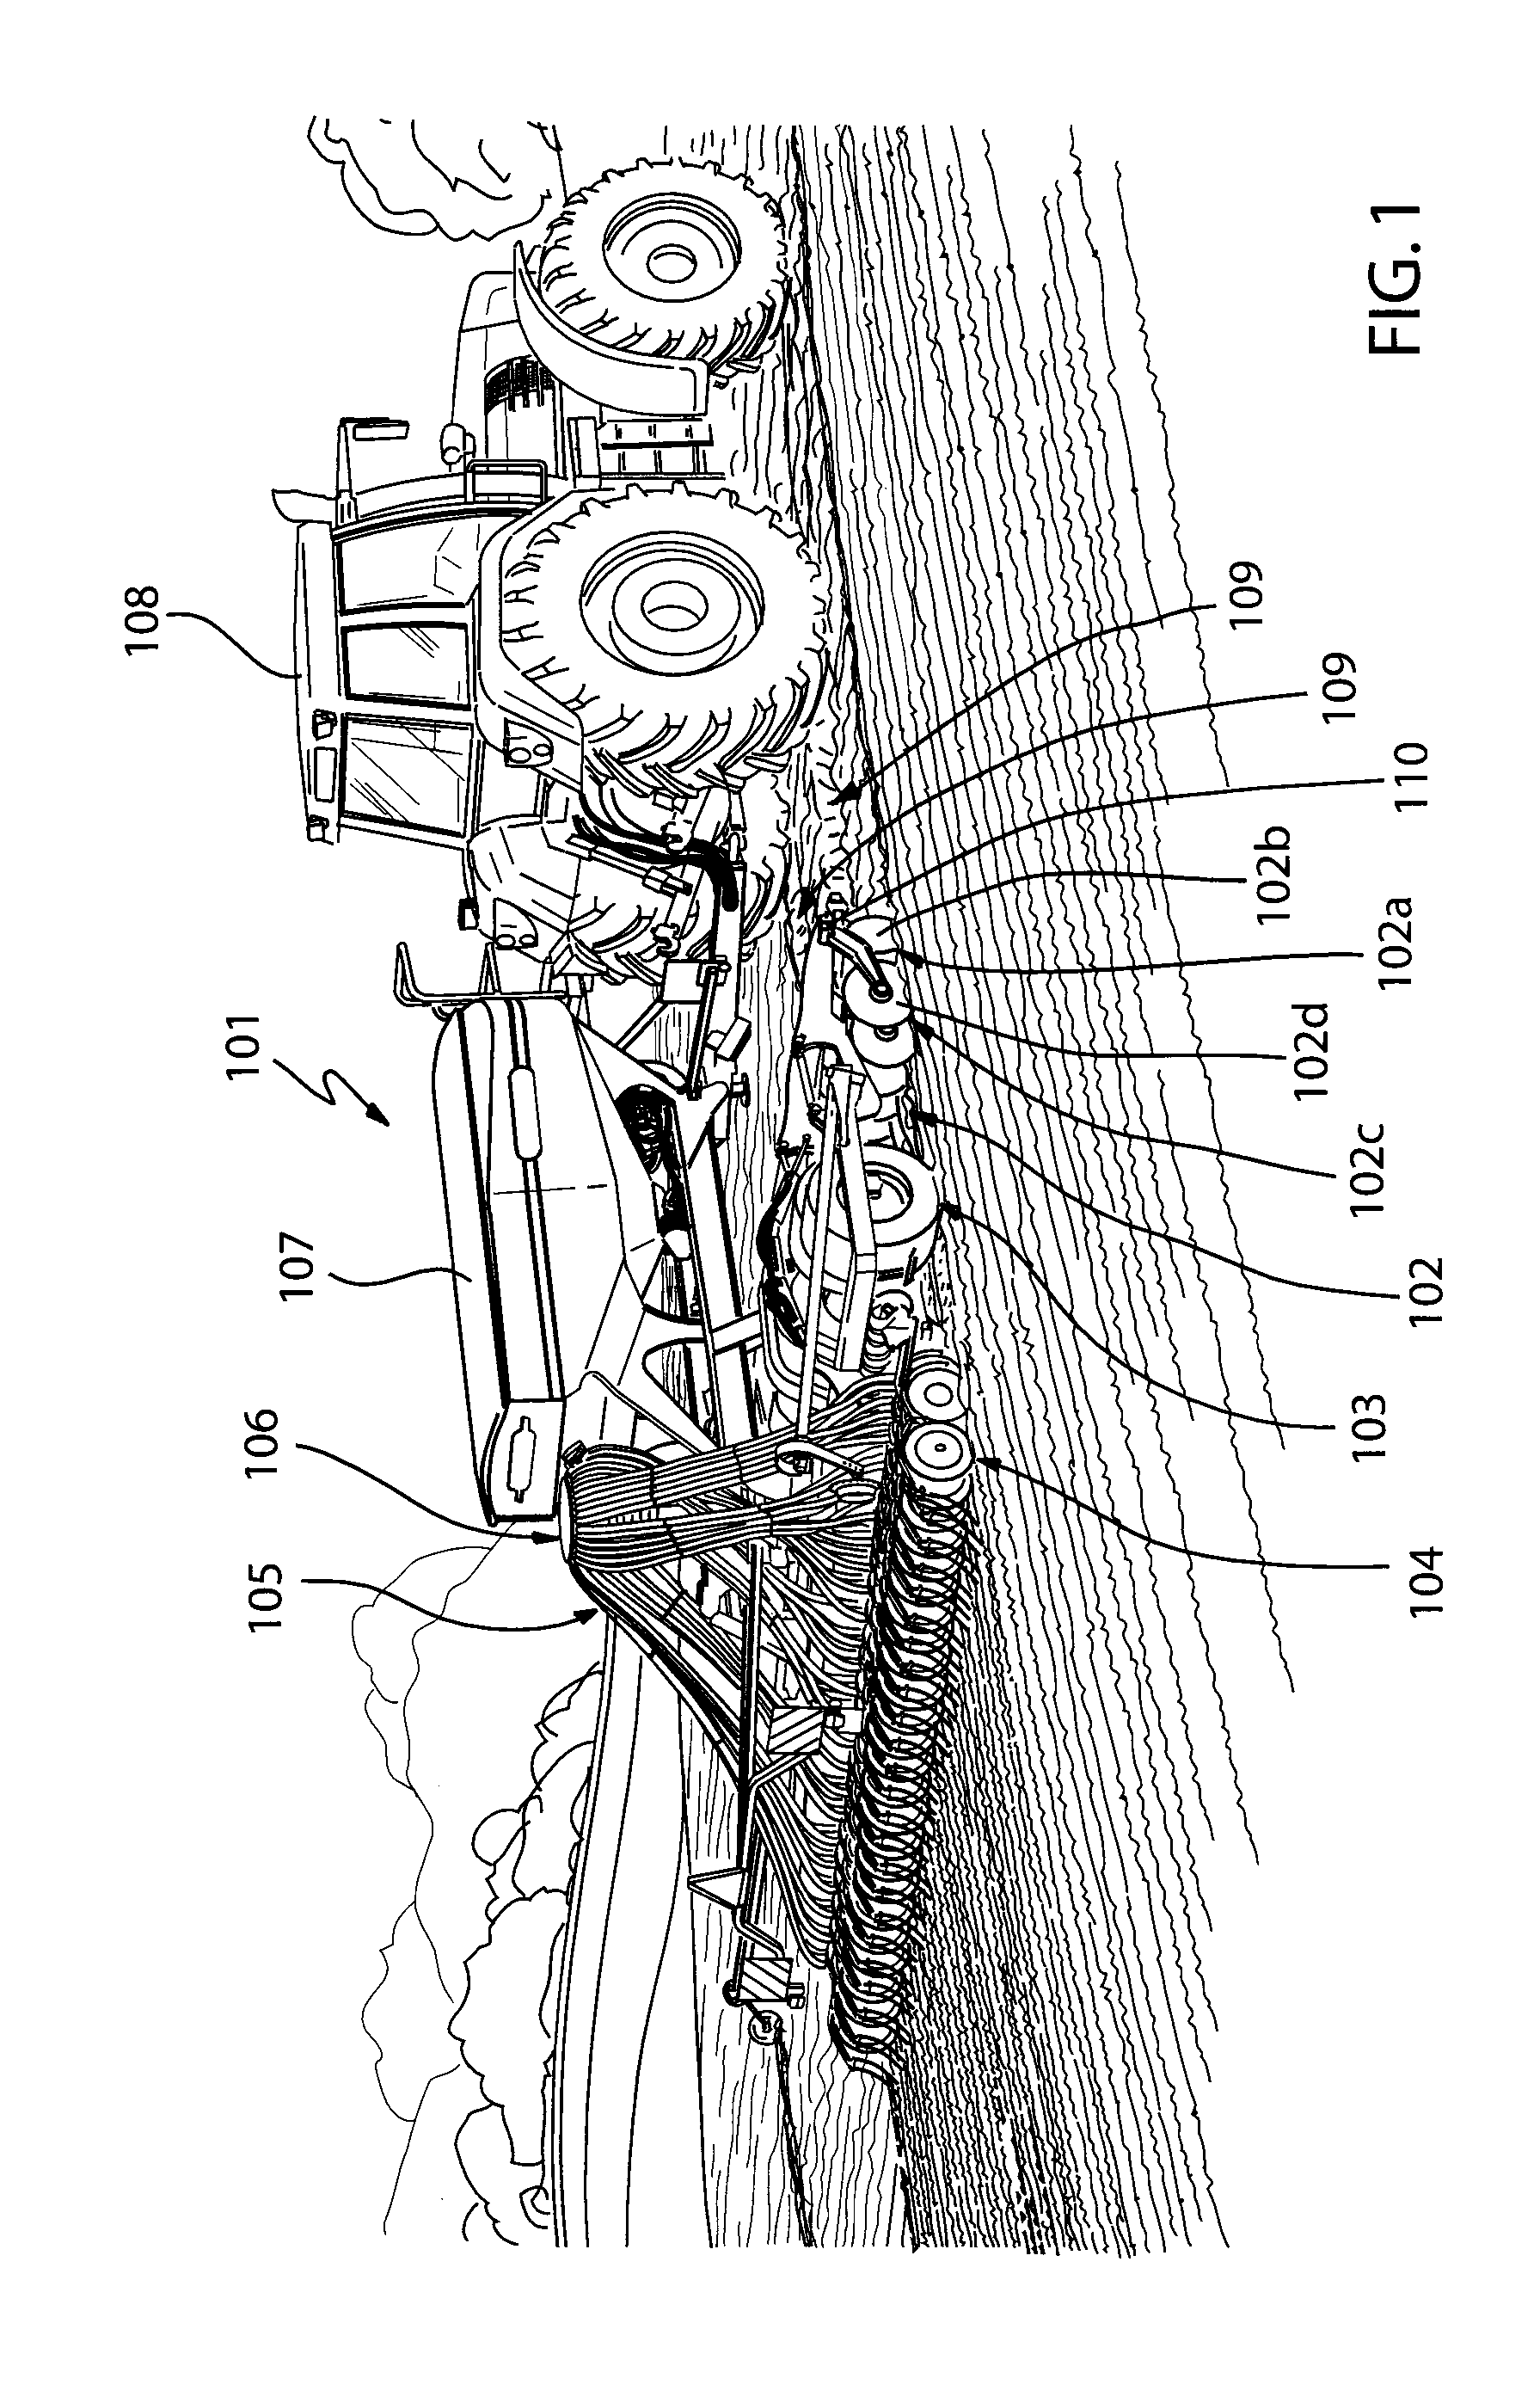 Cultivator with two rows of discs in direction of travel